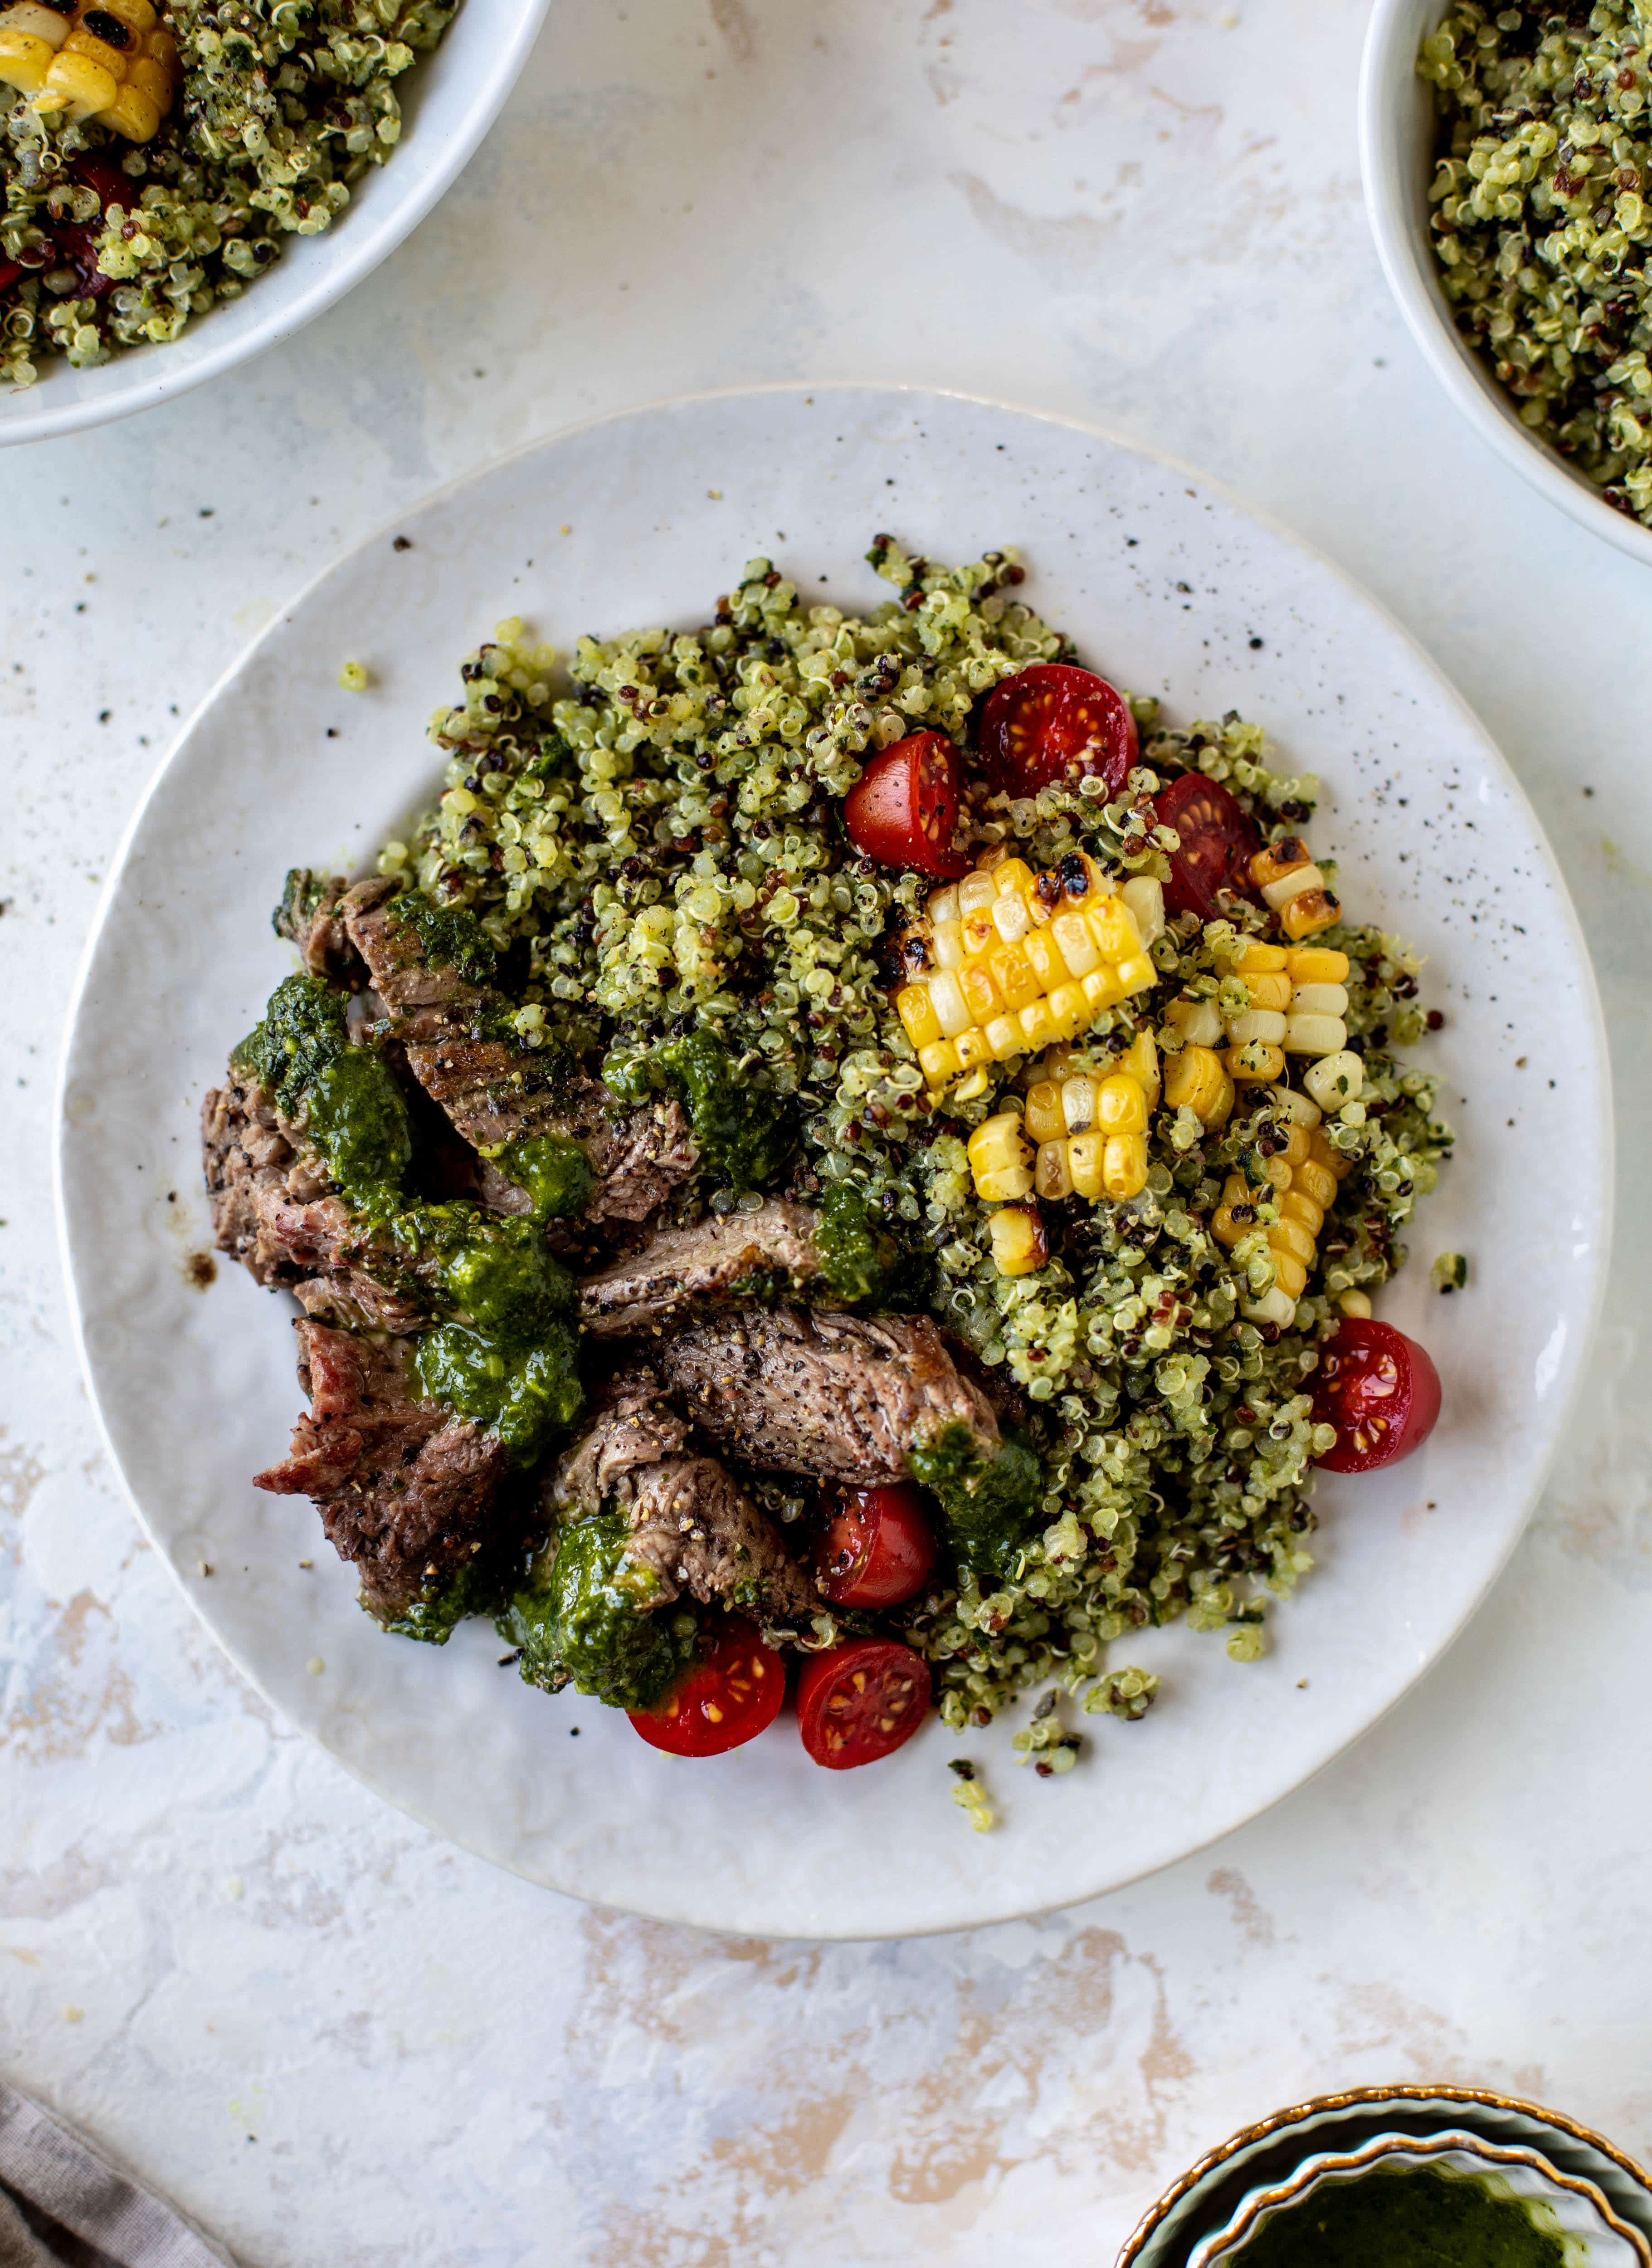 This chimichurri quinoa with flank steak is so incredibly delicious and flavorful! The steak is juicy and tender; the quinoa is loaded with flavor. Love it!